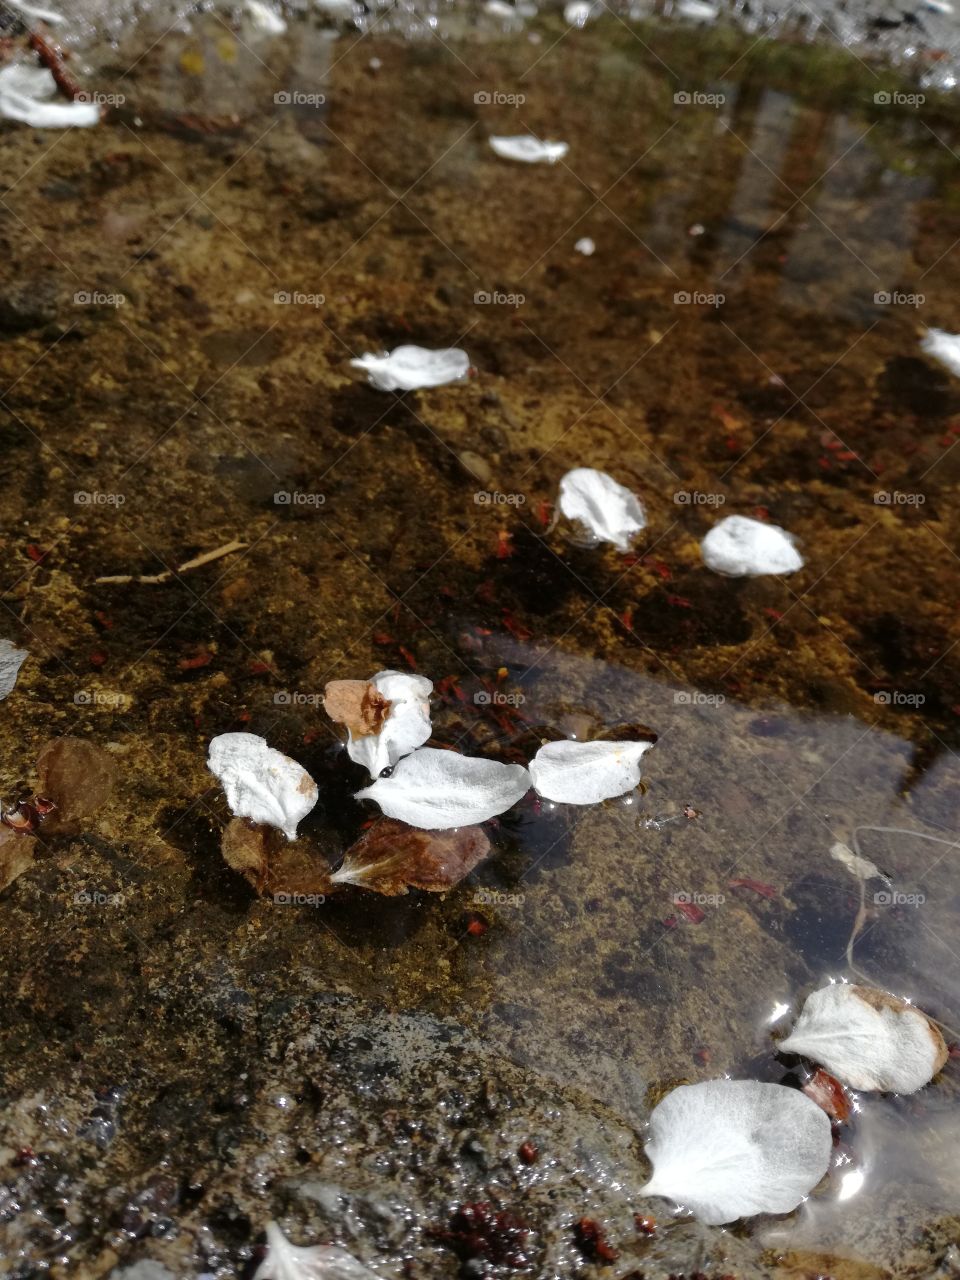 White little leafs floating on water